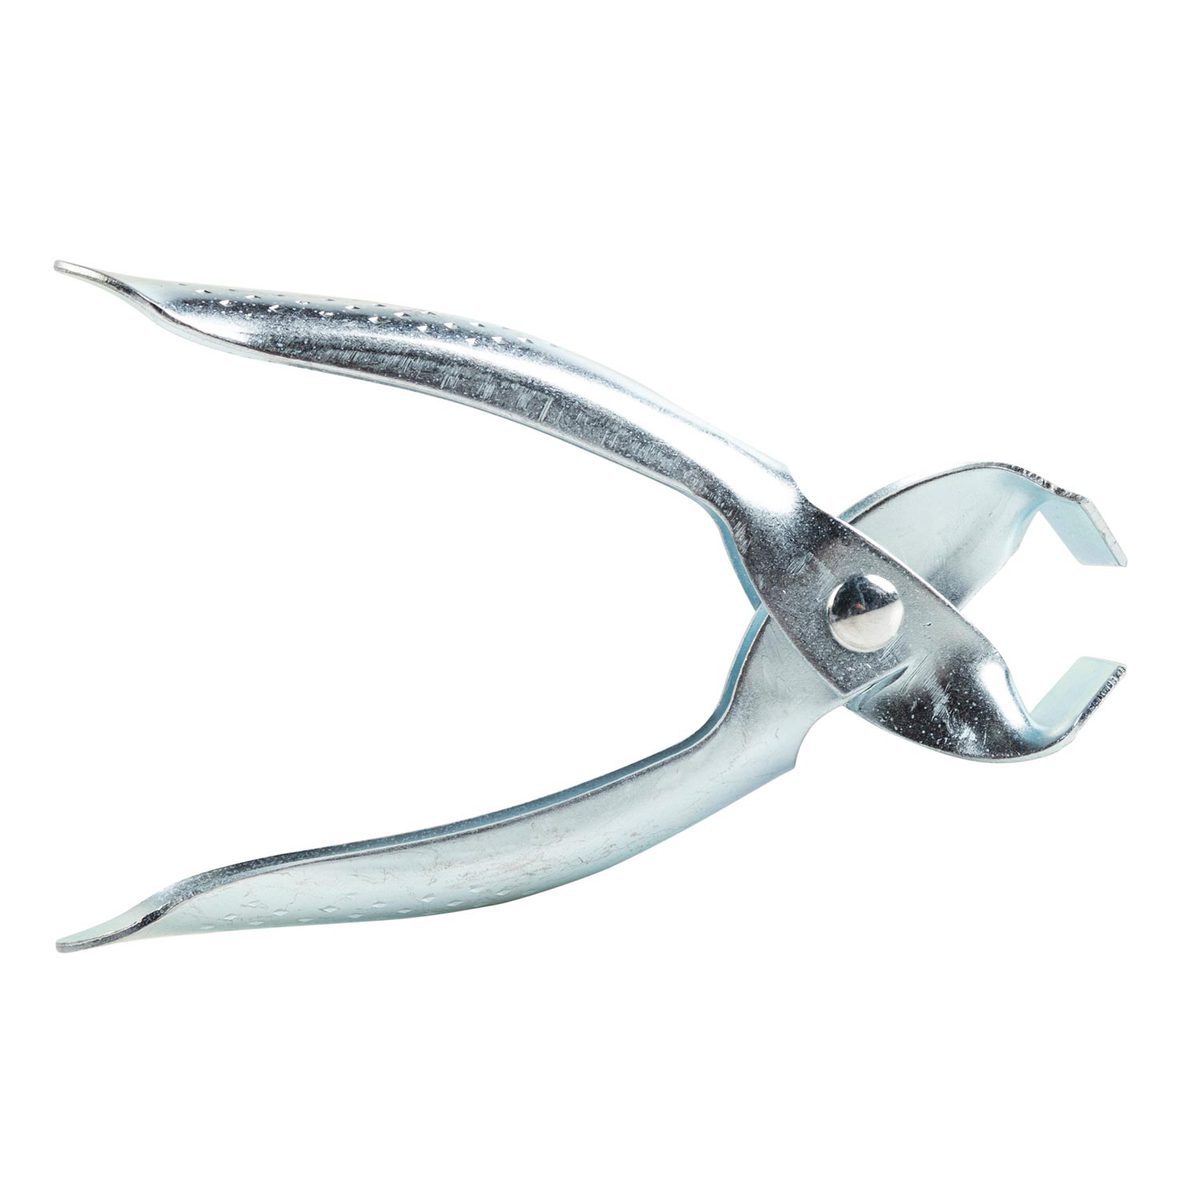 8” Stainless Steel Needle Nose Pliers - P-Line